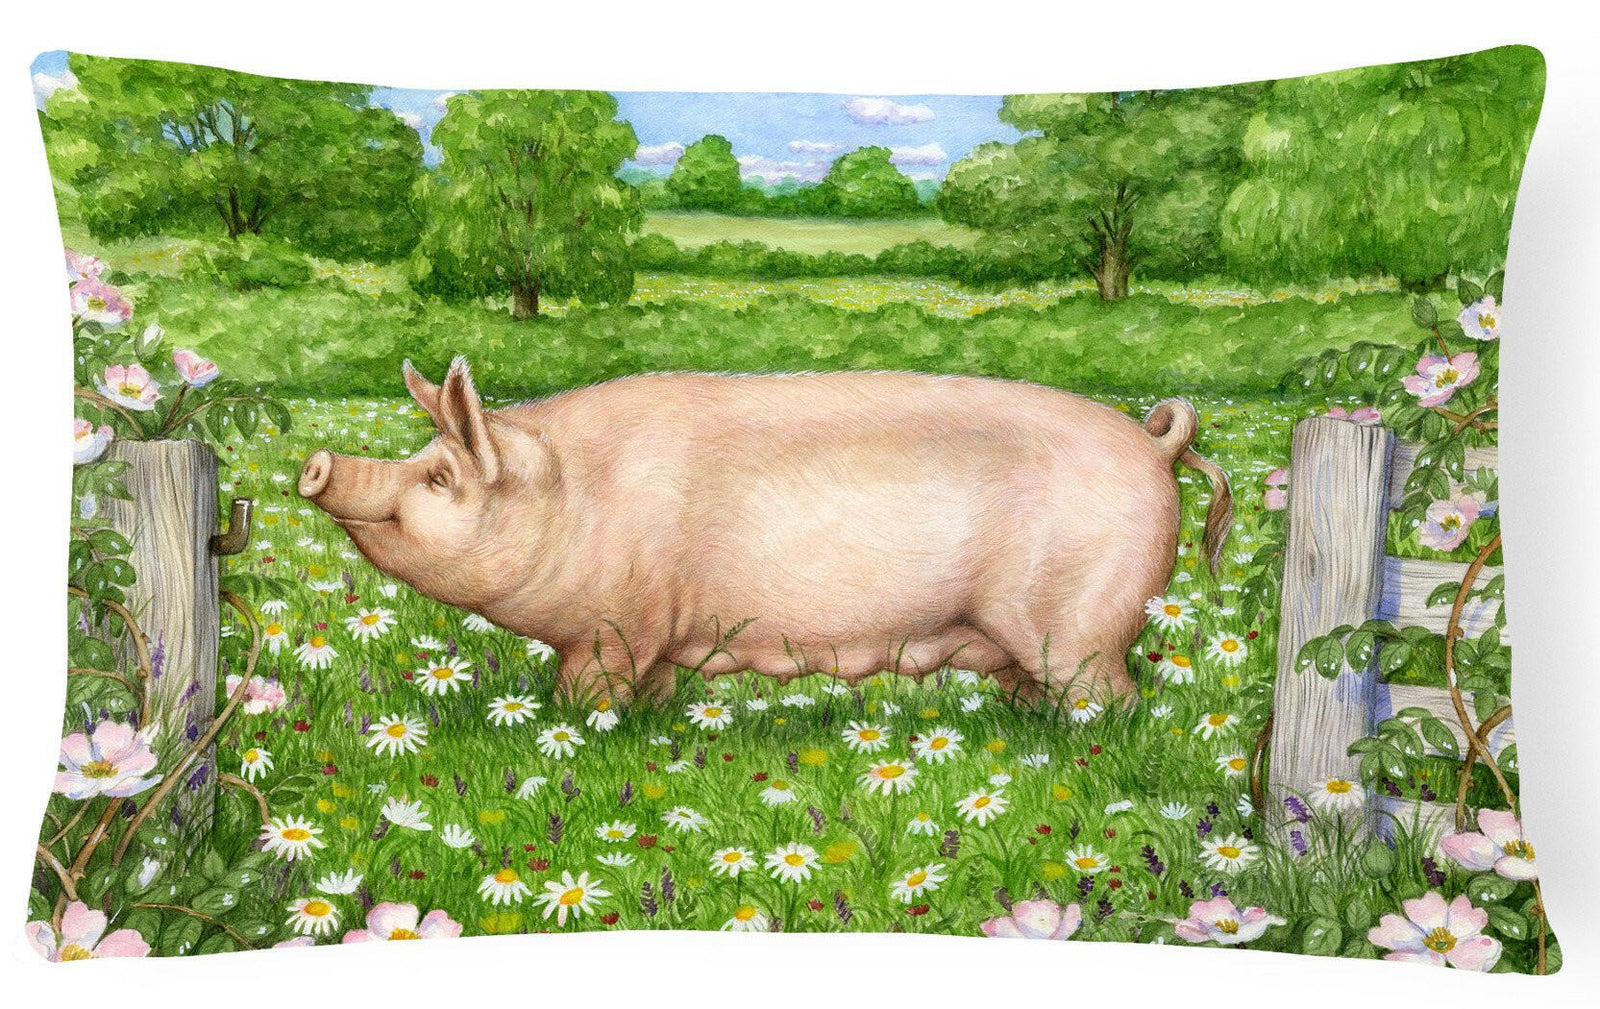 Pig In Dasies by Debbie Cook Fabric Decorative Pillow CDCO0374PW1216 by Caroline's Treasures